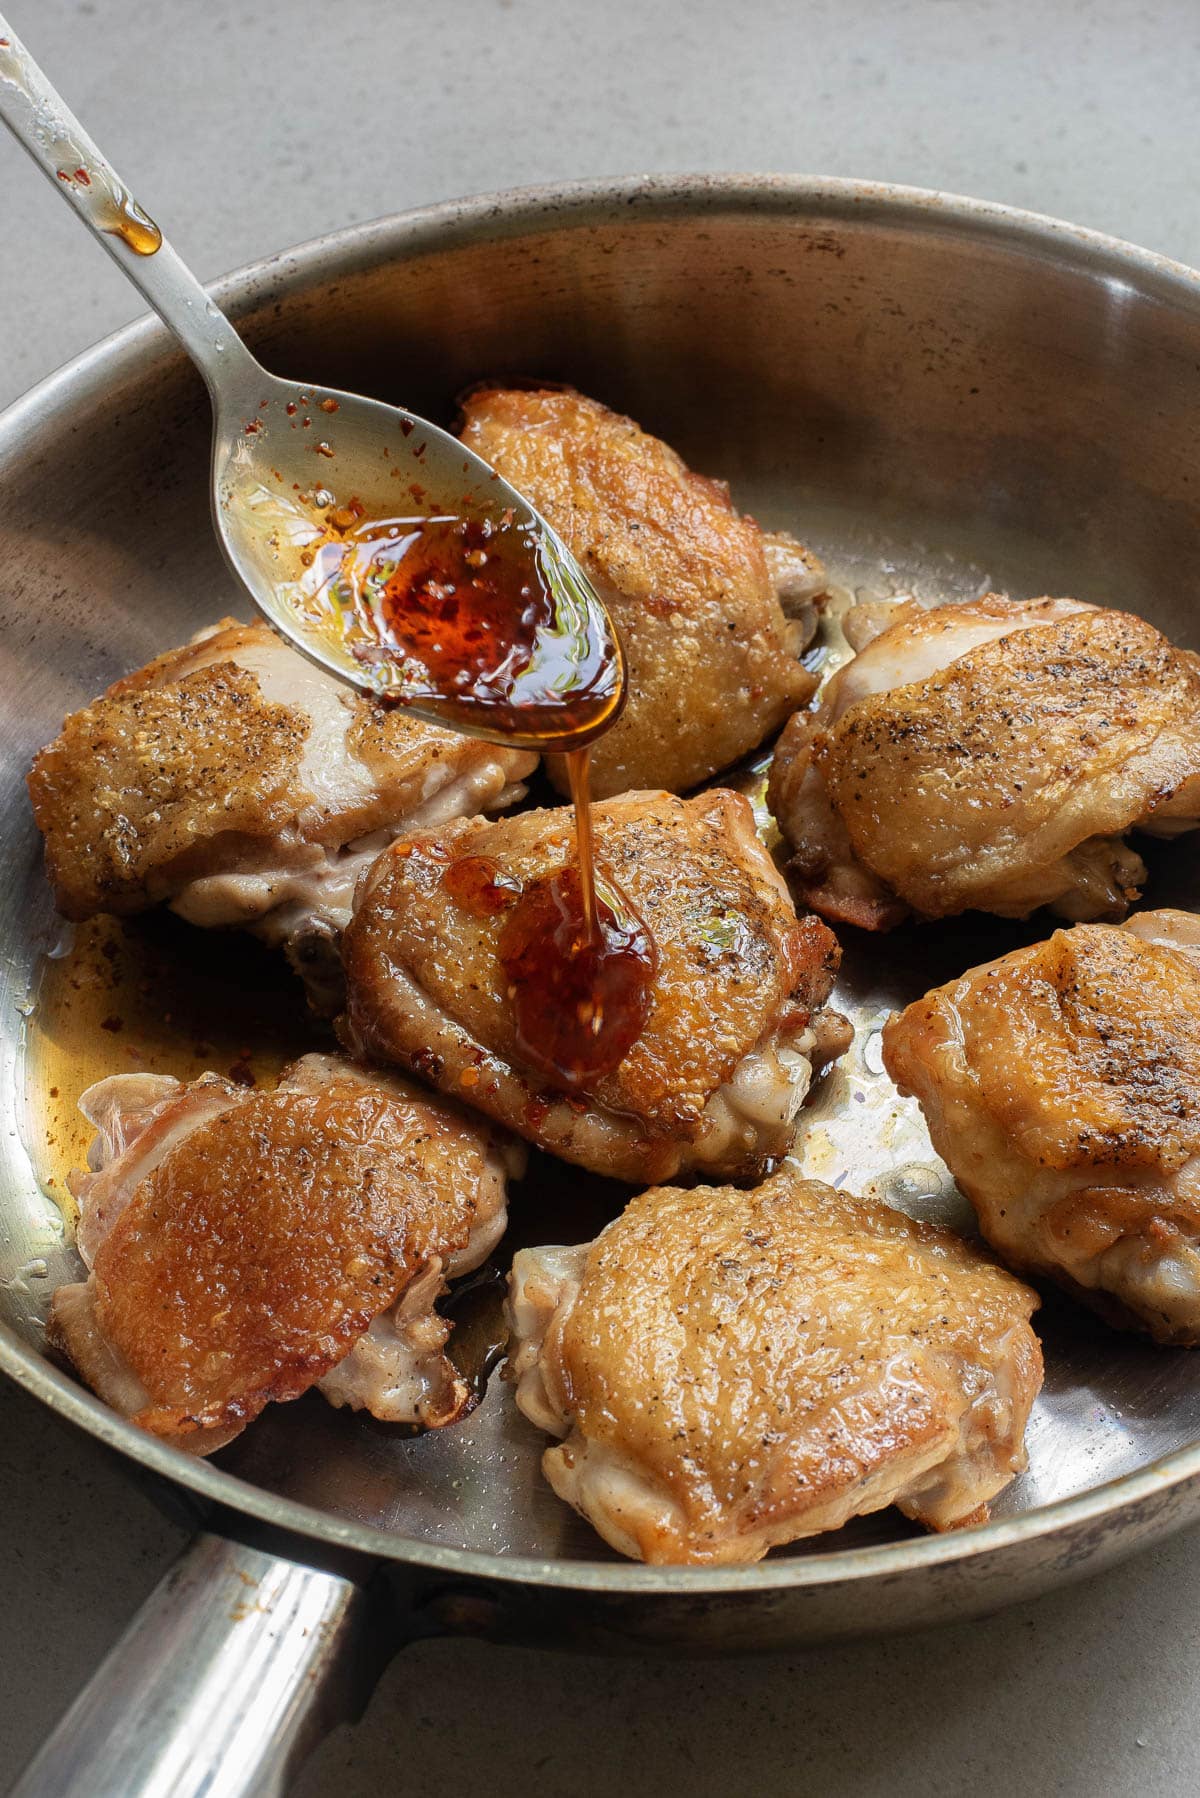 Chicken with sauce in a stainless pan.